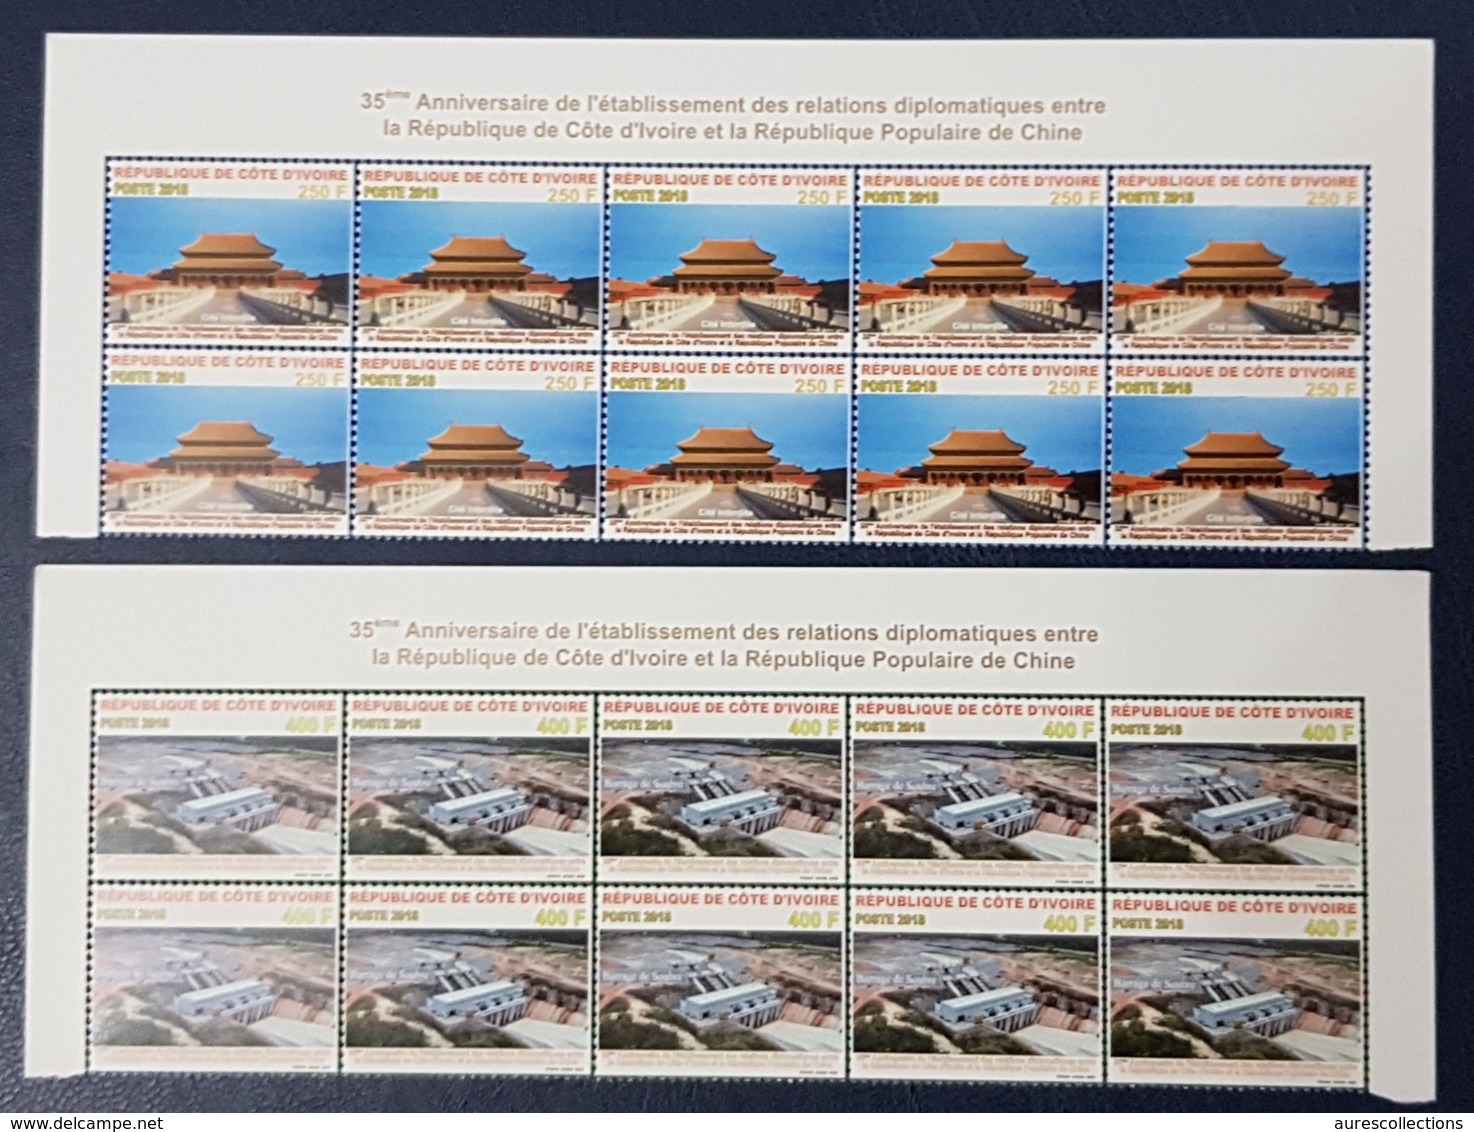 COTE D'IVOIRE IVORY COAST 2018 BLOCK OF 10 - ANNIV. DIPLOMATIC RELATION RELATIONS DIPLOMATIQUES CHINA CHINE - RARE - MNH - Ivory Coast (1960-...)